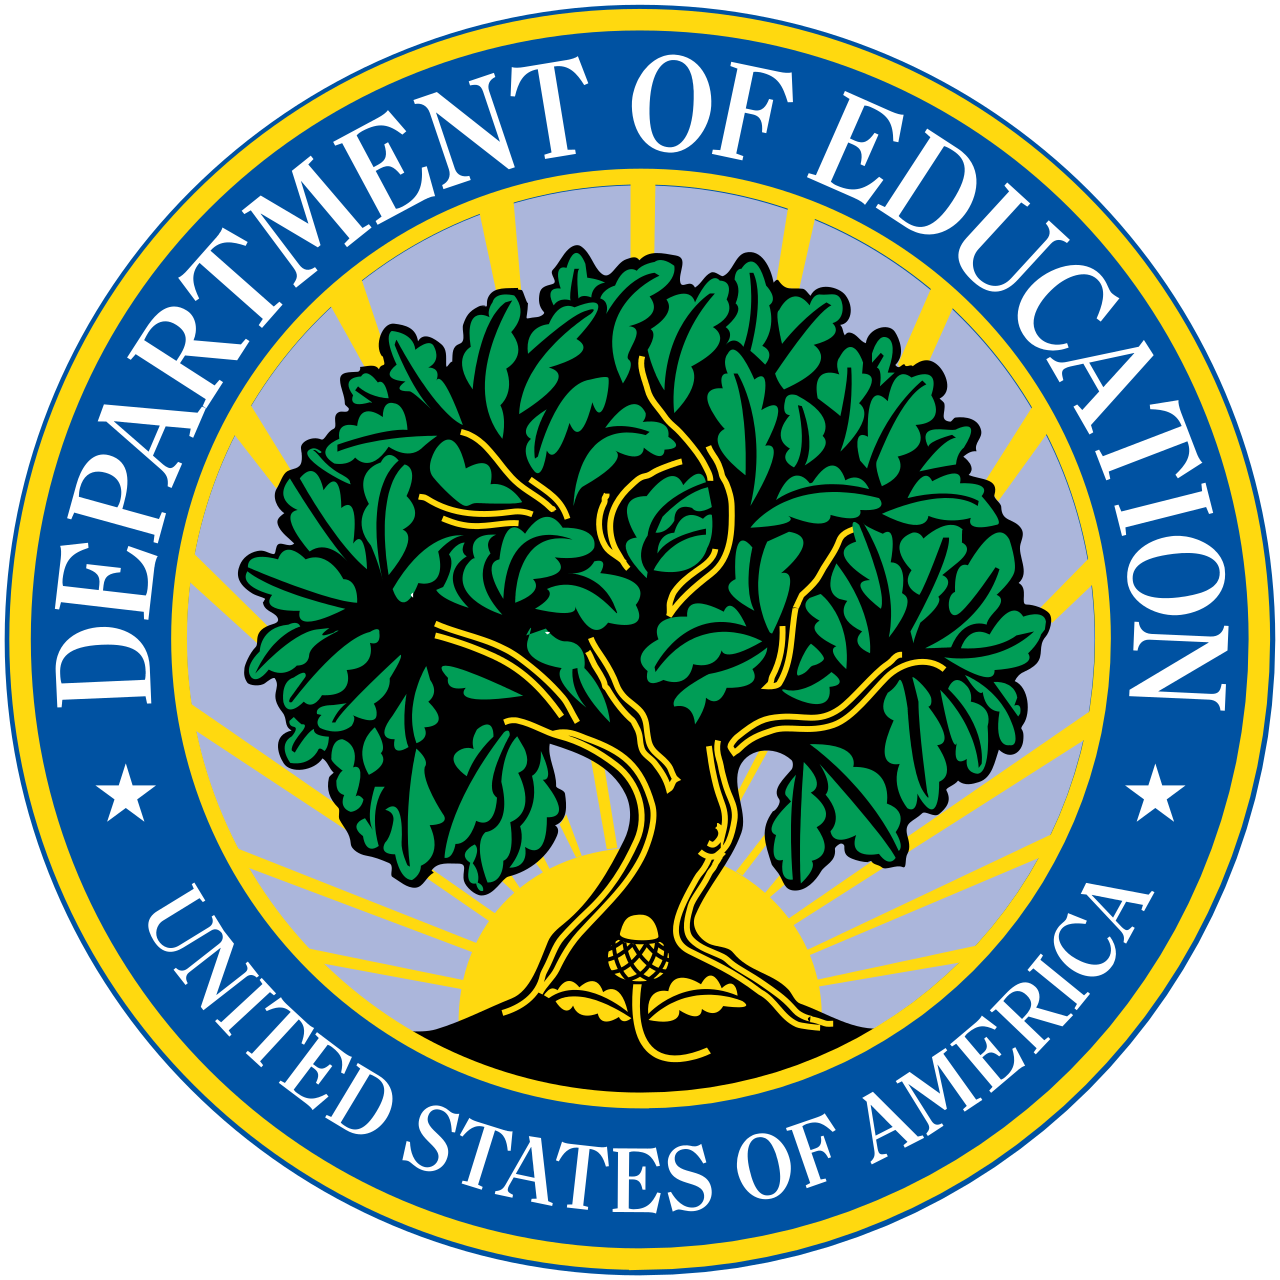 COVID-19 resources from the U.S. Department of Education